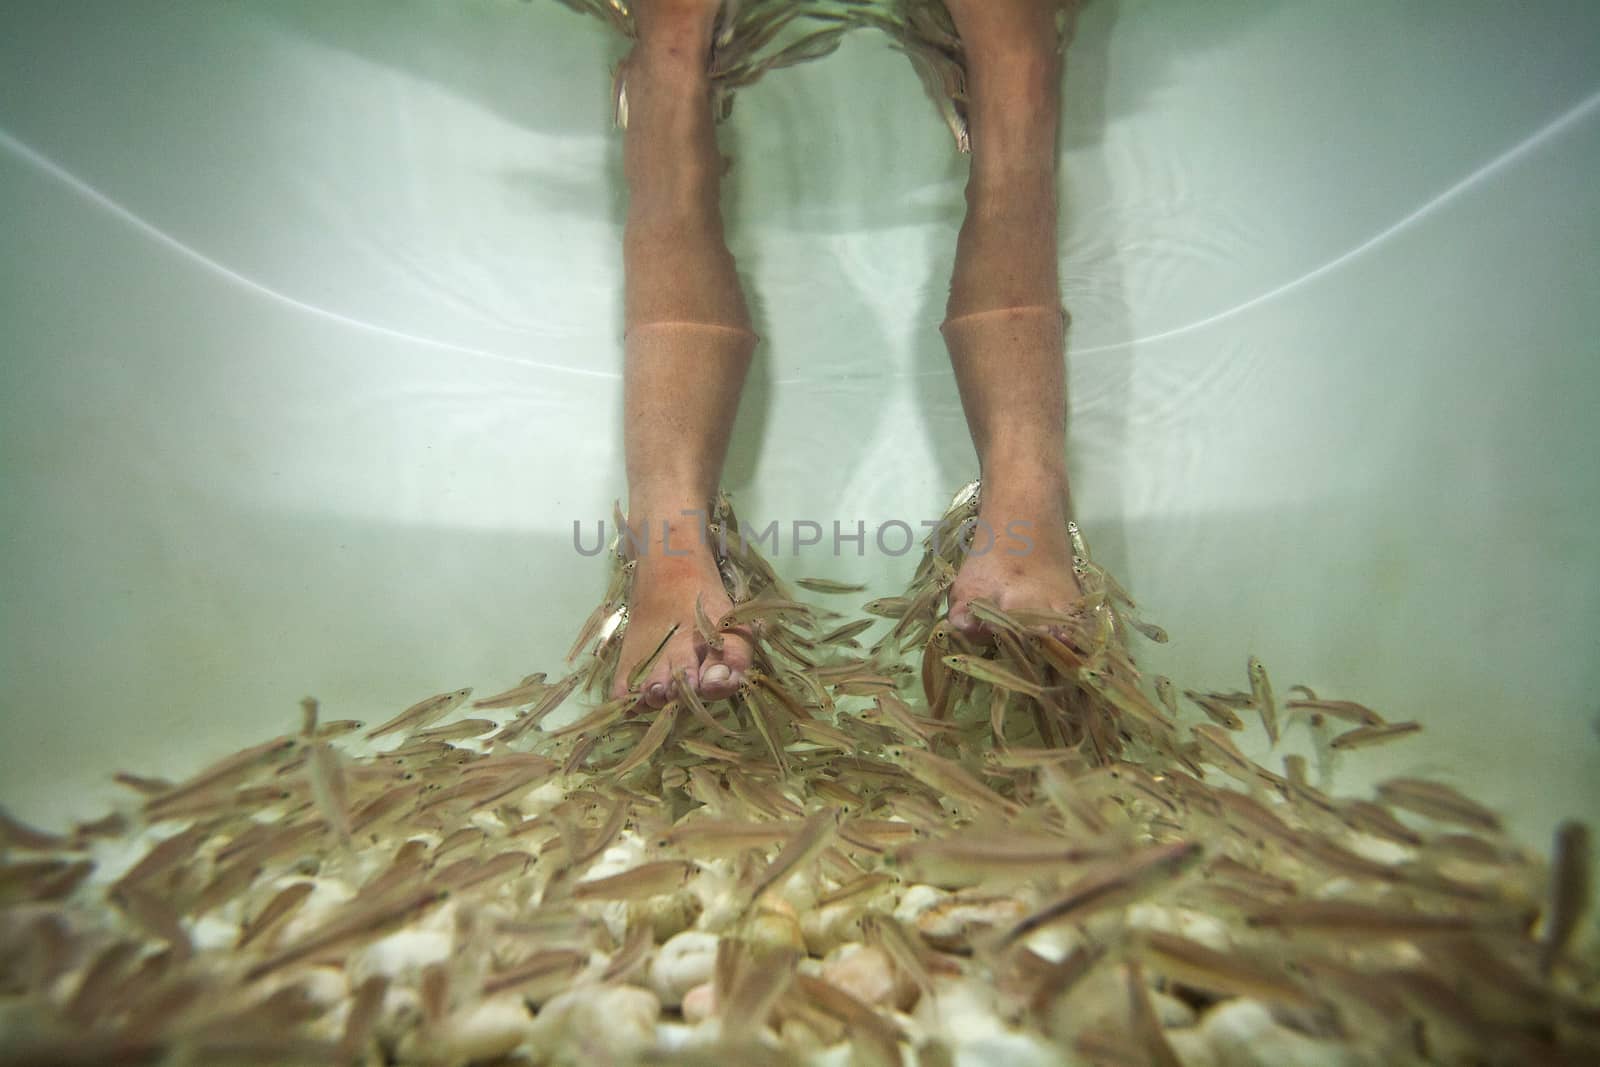 Fish spa feet pedicure skin care treatment with the fish rufa garra, also called doctor fish, nibble fish and kangal fish.